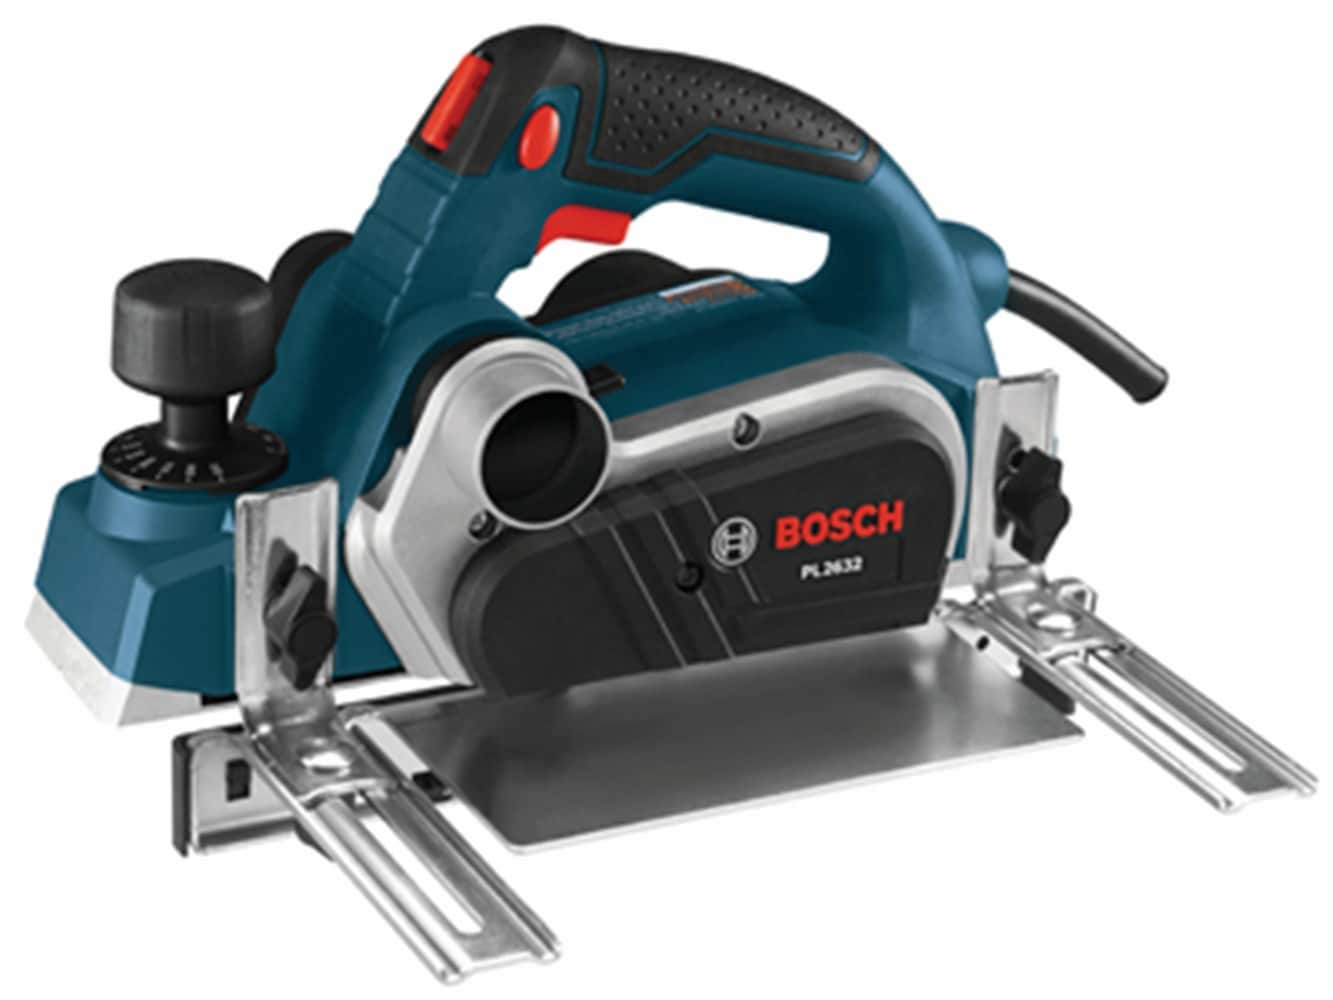 Bosch home and garden tools sale on  - Save up to 43